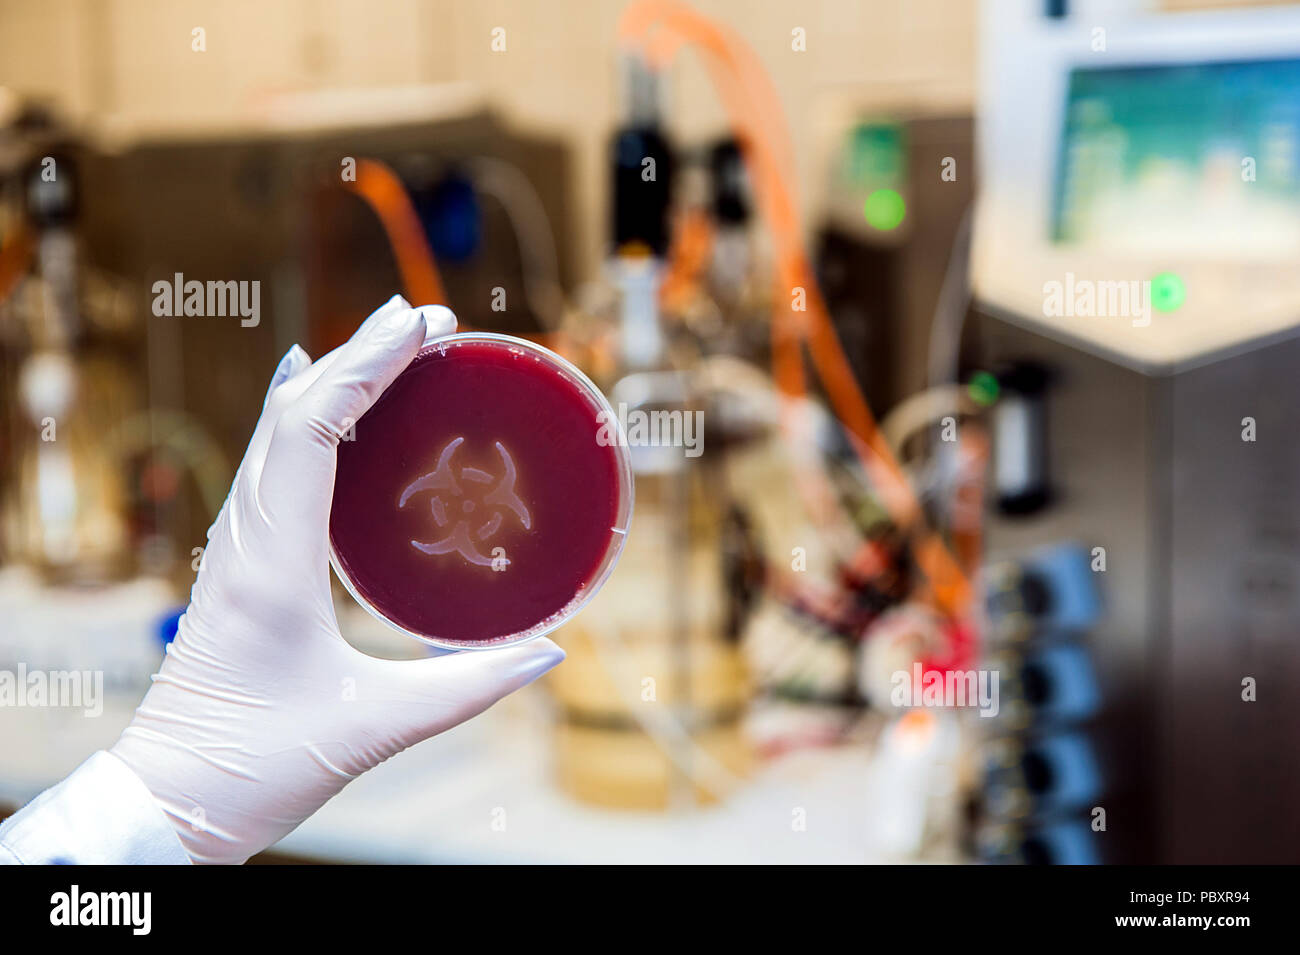 A hand in disposable glove holding up a petri dish with a bacteria culture in the shape of the biohazard symbol in a biotechnology laboratory. Stock Photo